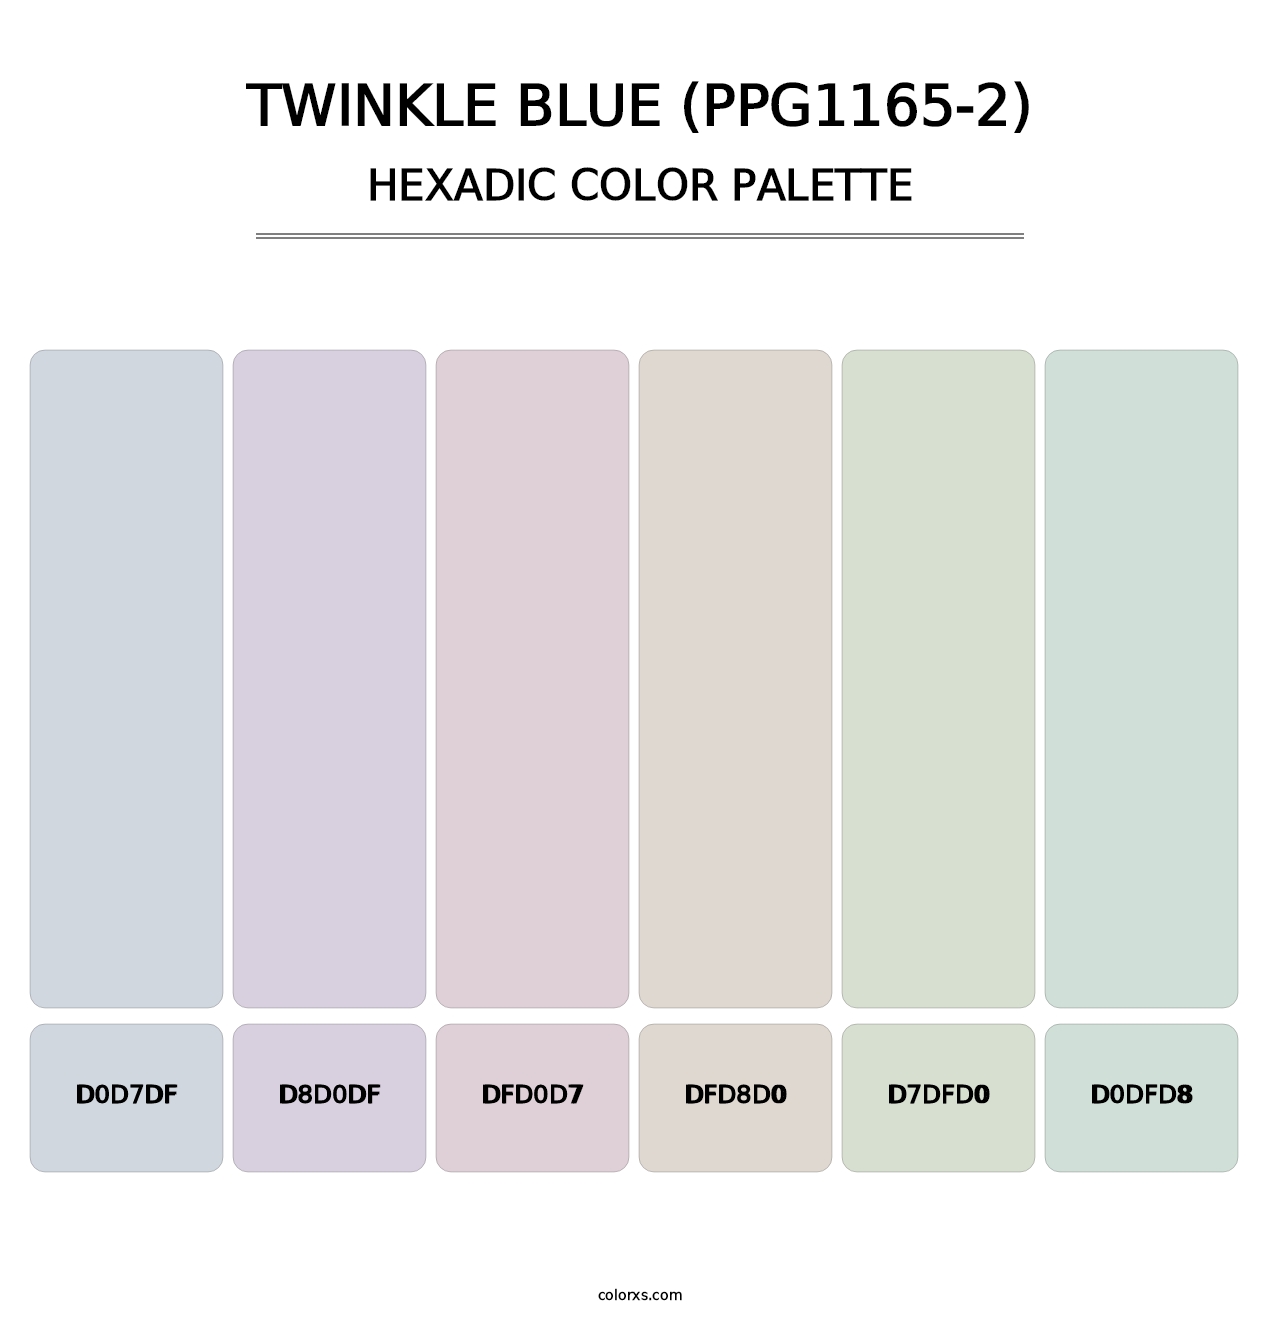 Twinkle Blue (PPG1165-2) - Hexadic Color Palette